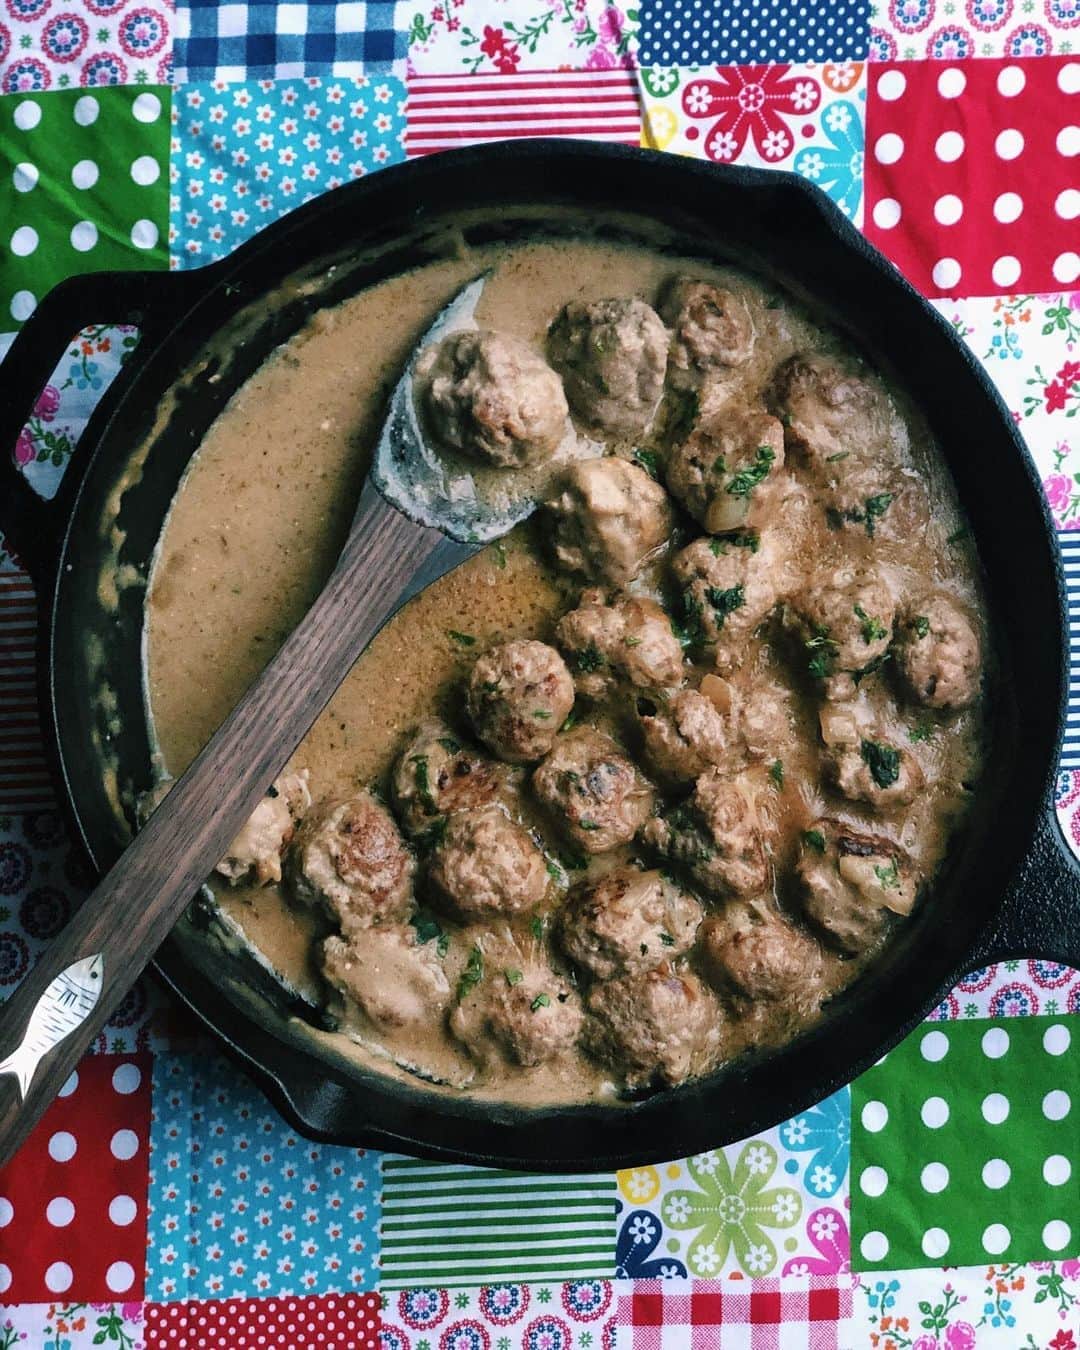 Antonietteのインスタグラム：「Every midsummer ☀️ I celebrate with friends and family with a feast, but for obvious reasons, could not this year. But that didn’t stop me from celebrating! I made Swedish meatballs (köttbullar) which were super delicious! Served it with a salad, mashed potatoes, and a few glasses of rosé 🍷 (for the adults of course). But the kids didn’t like it. What’s not to like? They’re bite sized balls with gravy, for crying out loud! Don’t they scream fun food? But nope. Ugh. So after all that work I made quesadillas. Basic AF. I don’t even know if I’m using that in the right context but it sure feels like it at the moment. 😆」